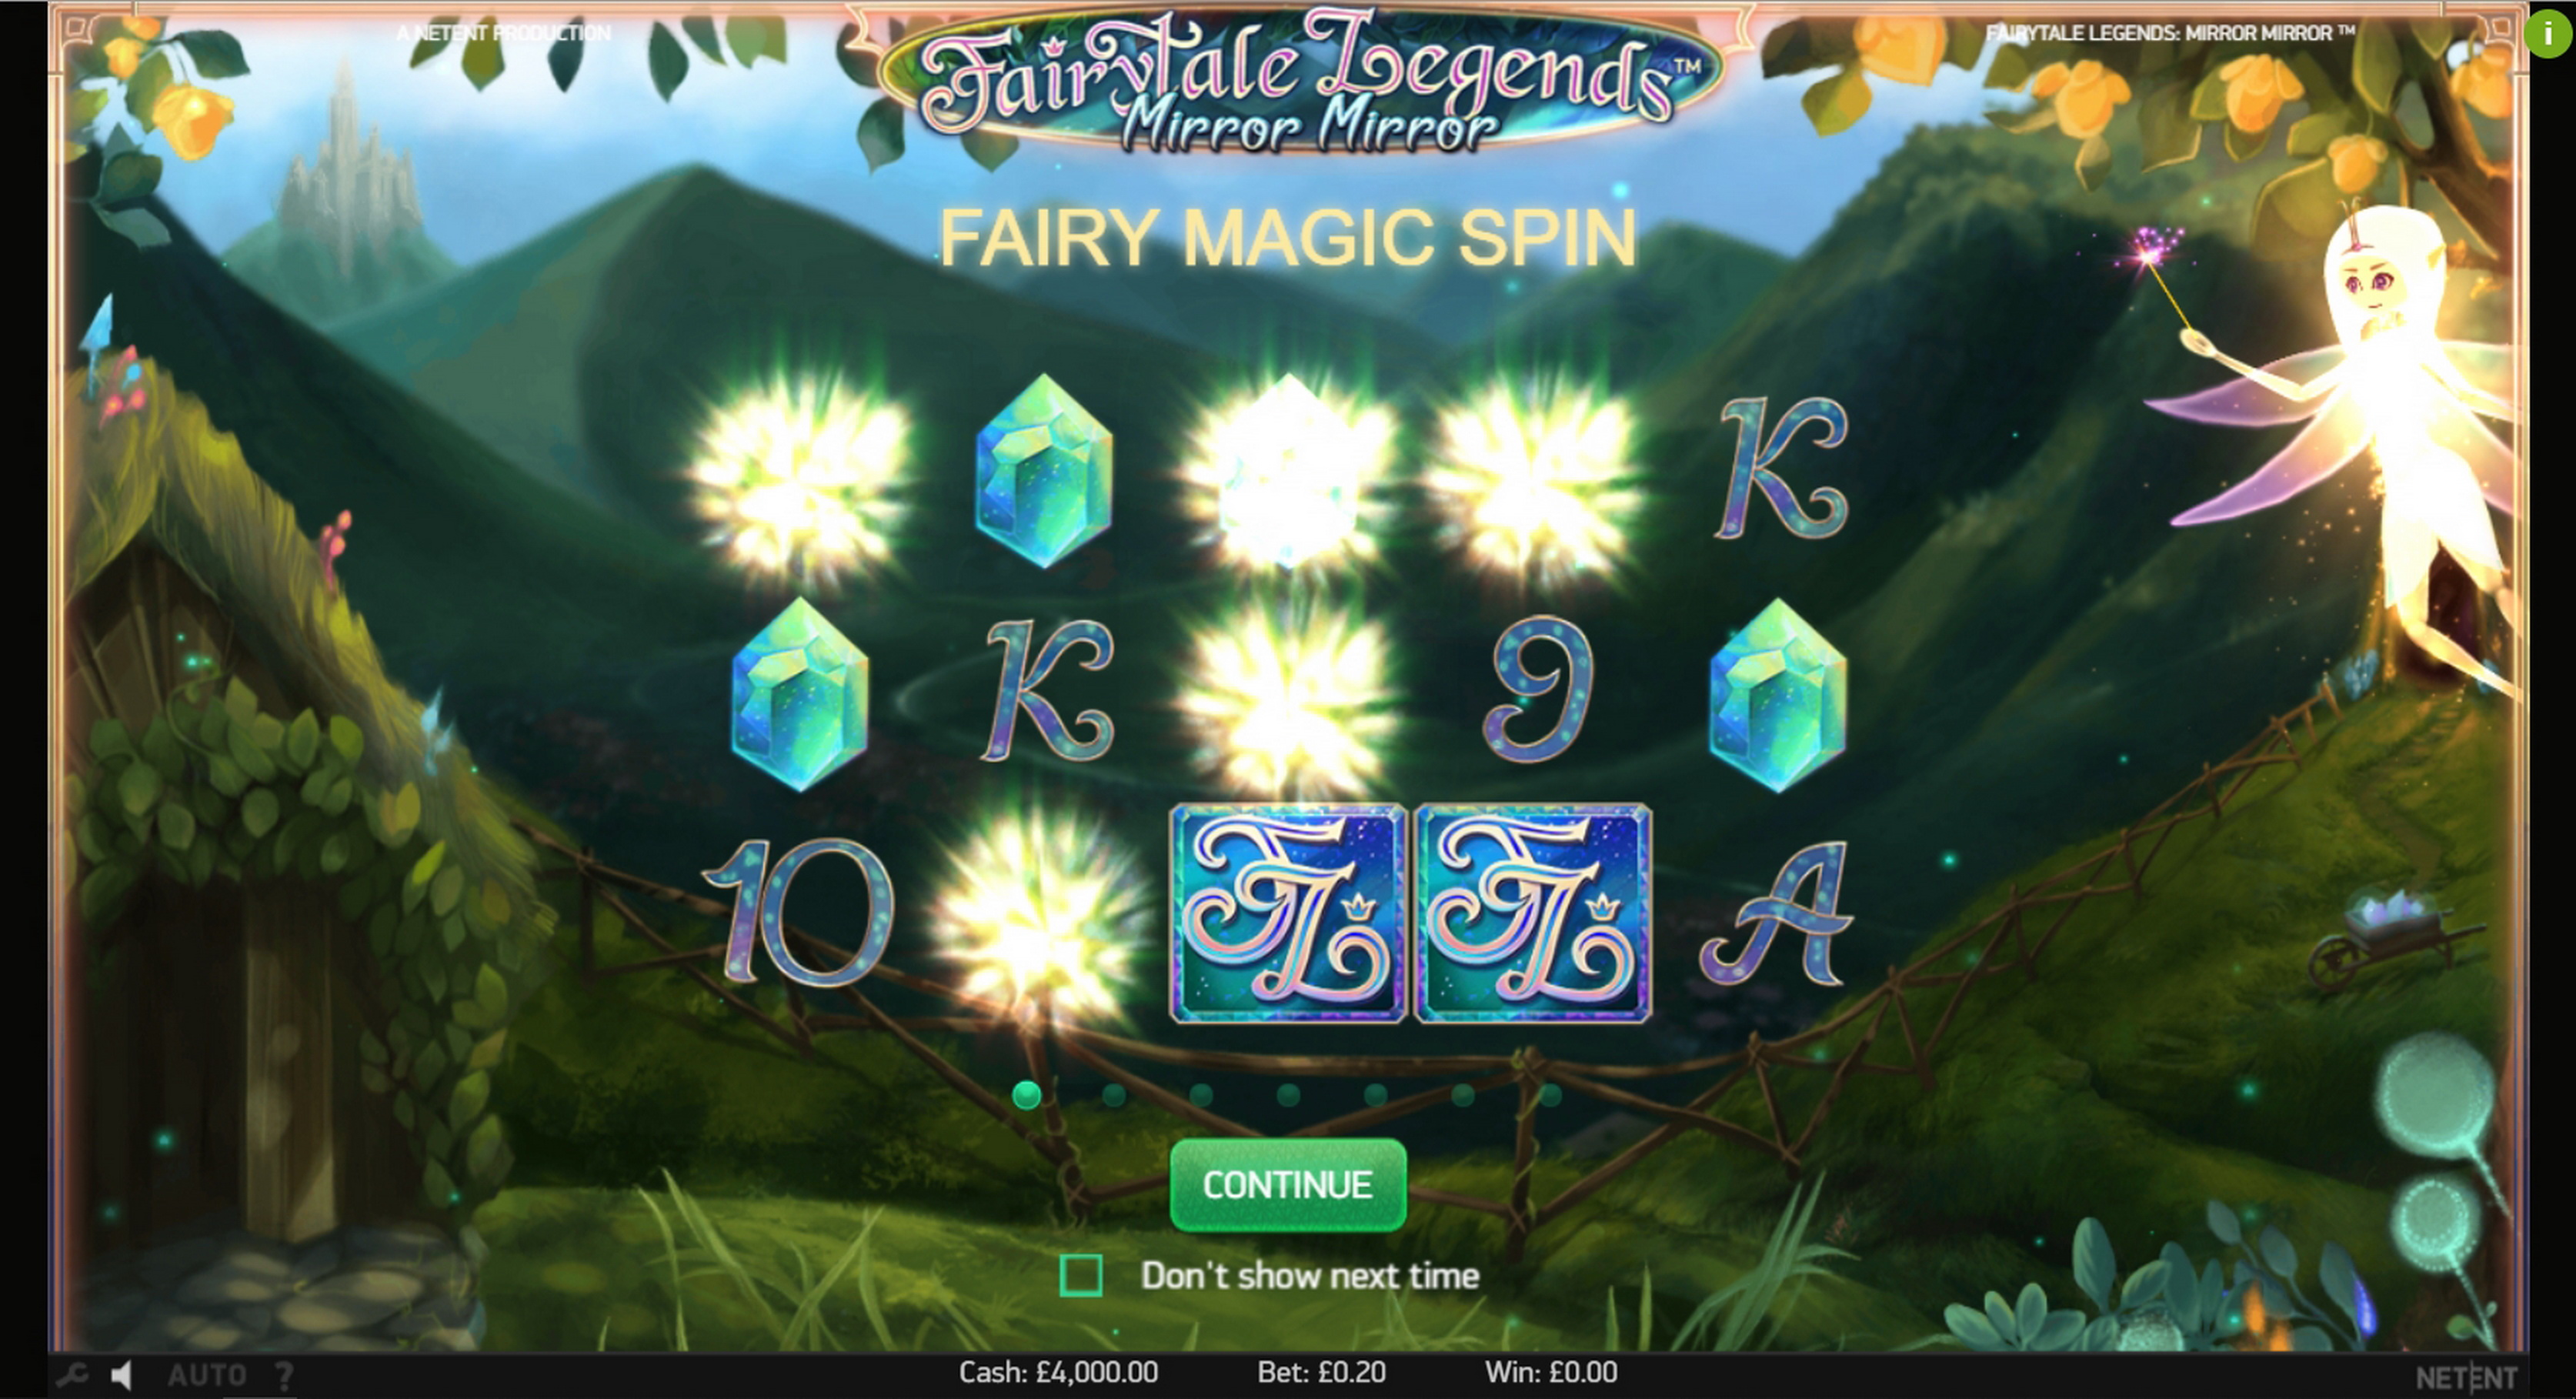 Play Fairytale Legends: Mirror Mirror Free Casino Slot Game by NetEnt